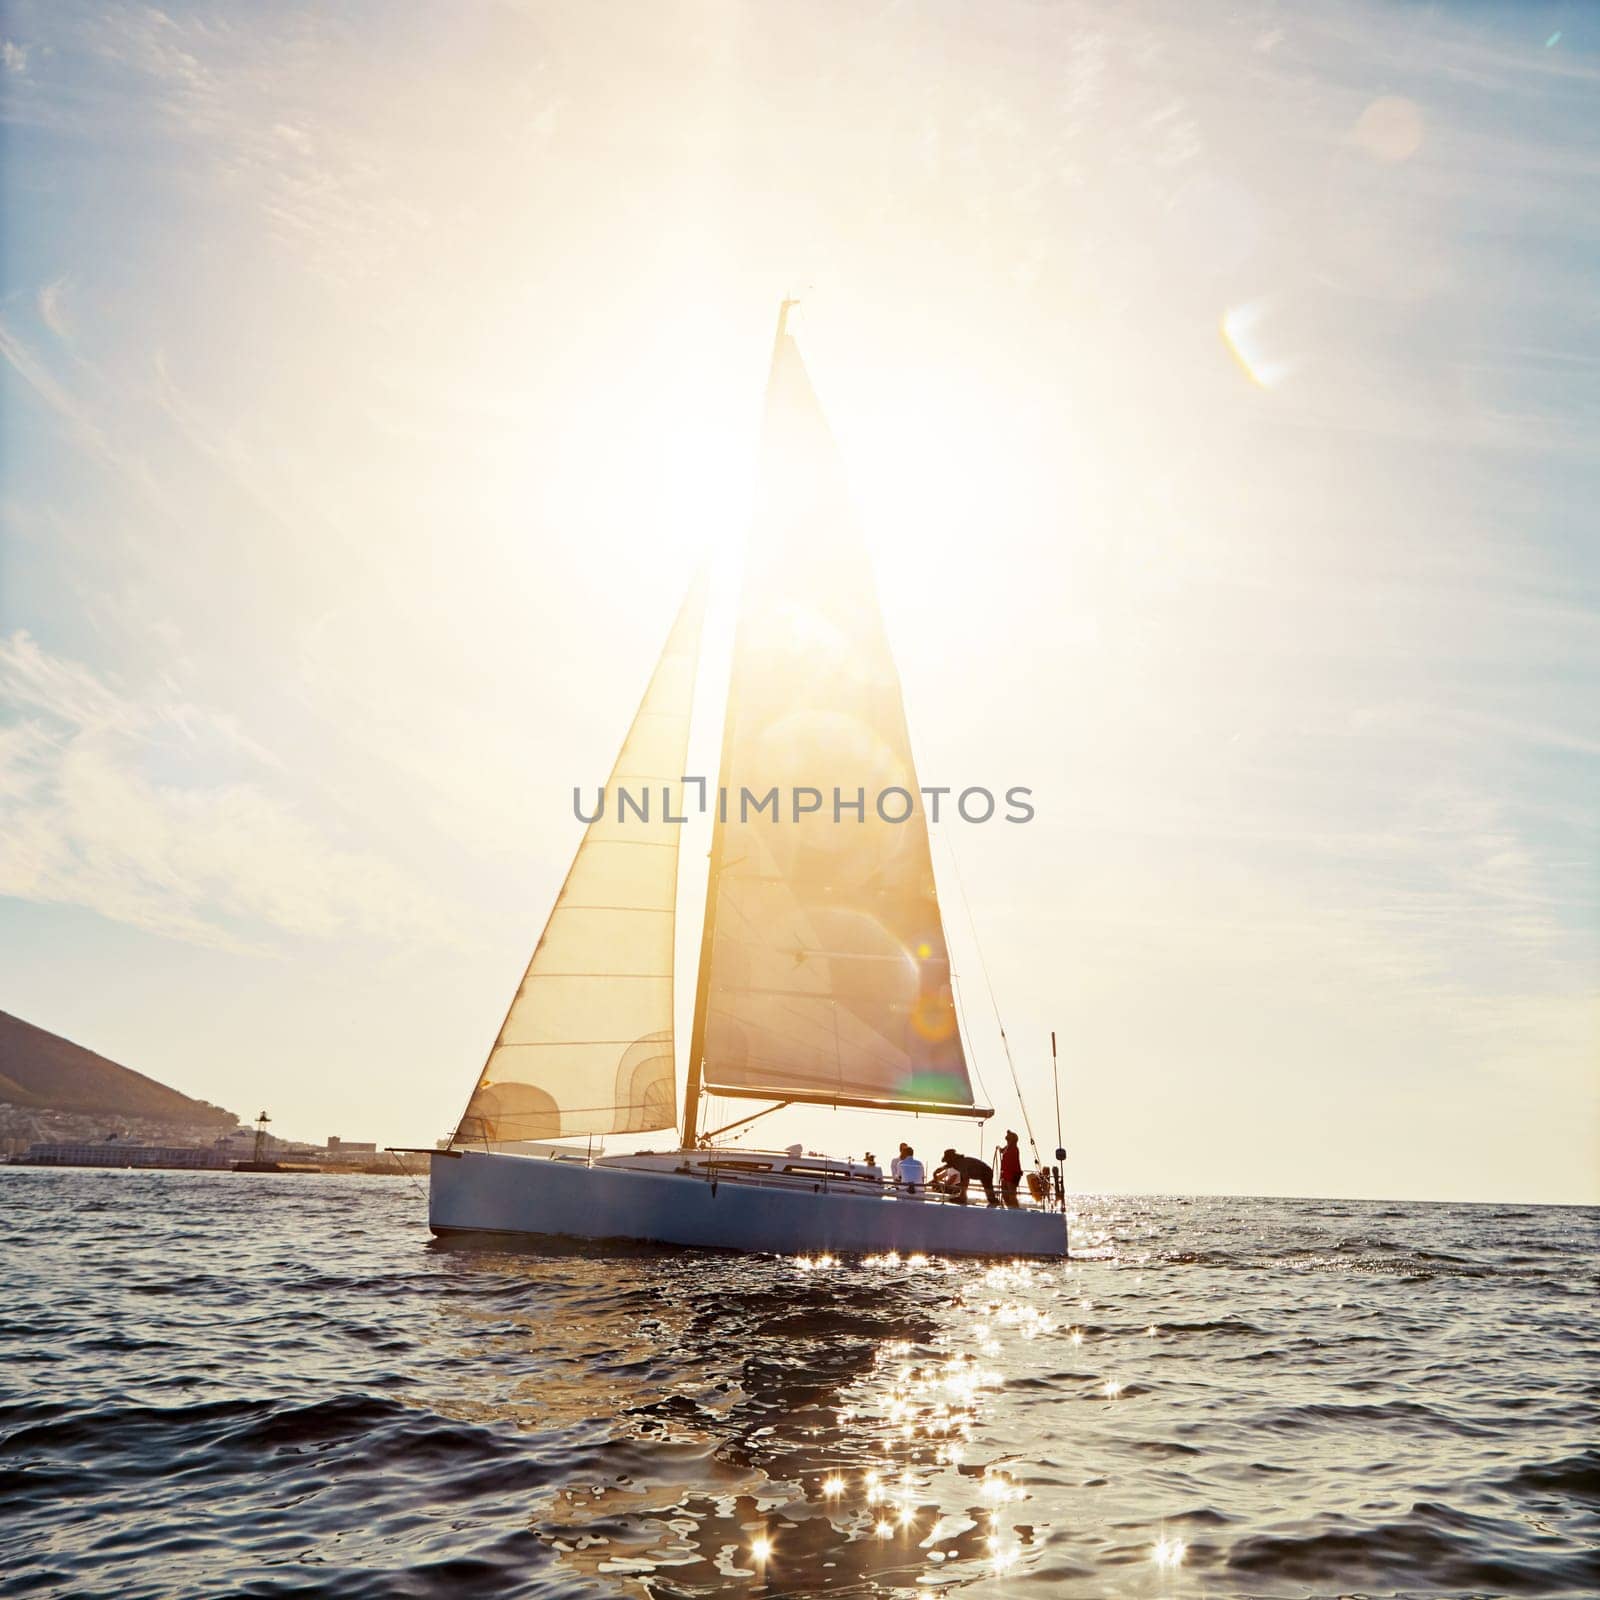 This is an obvious one for many vacationers. people sailing on a yacht